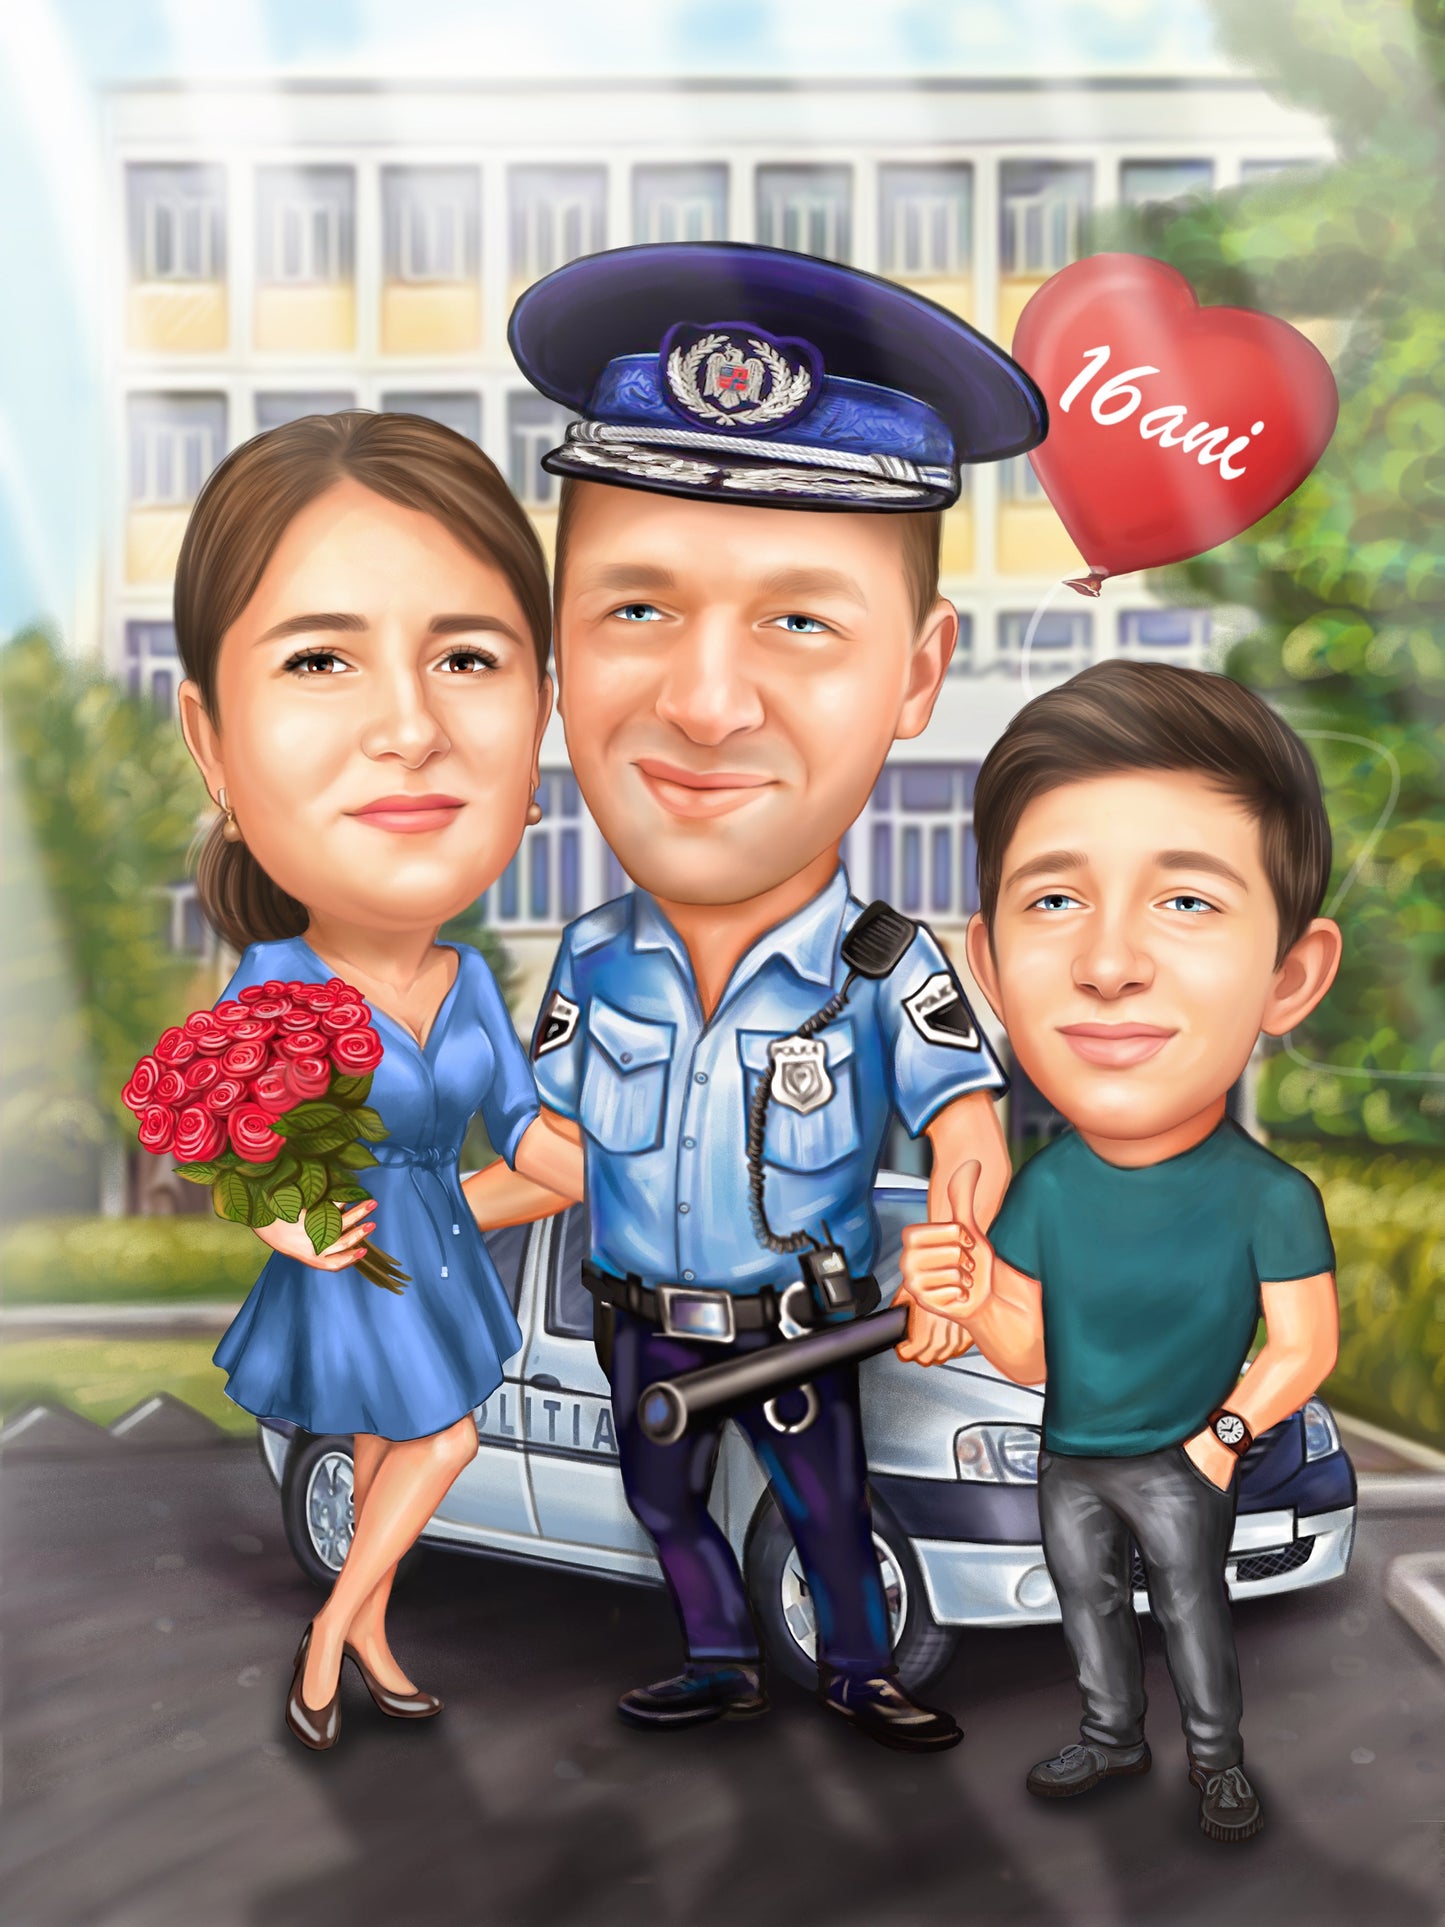 Policeman 16 years of relationship anniversary family caricature